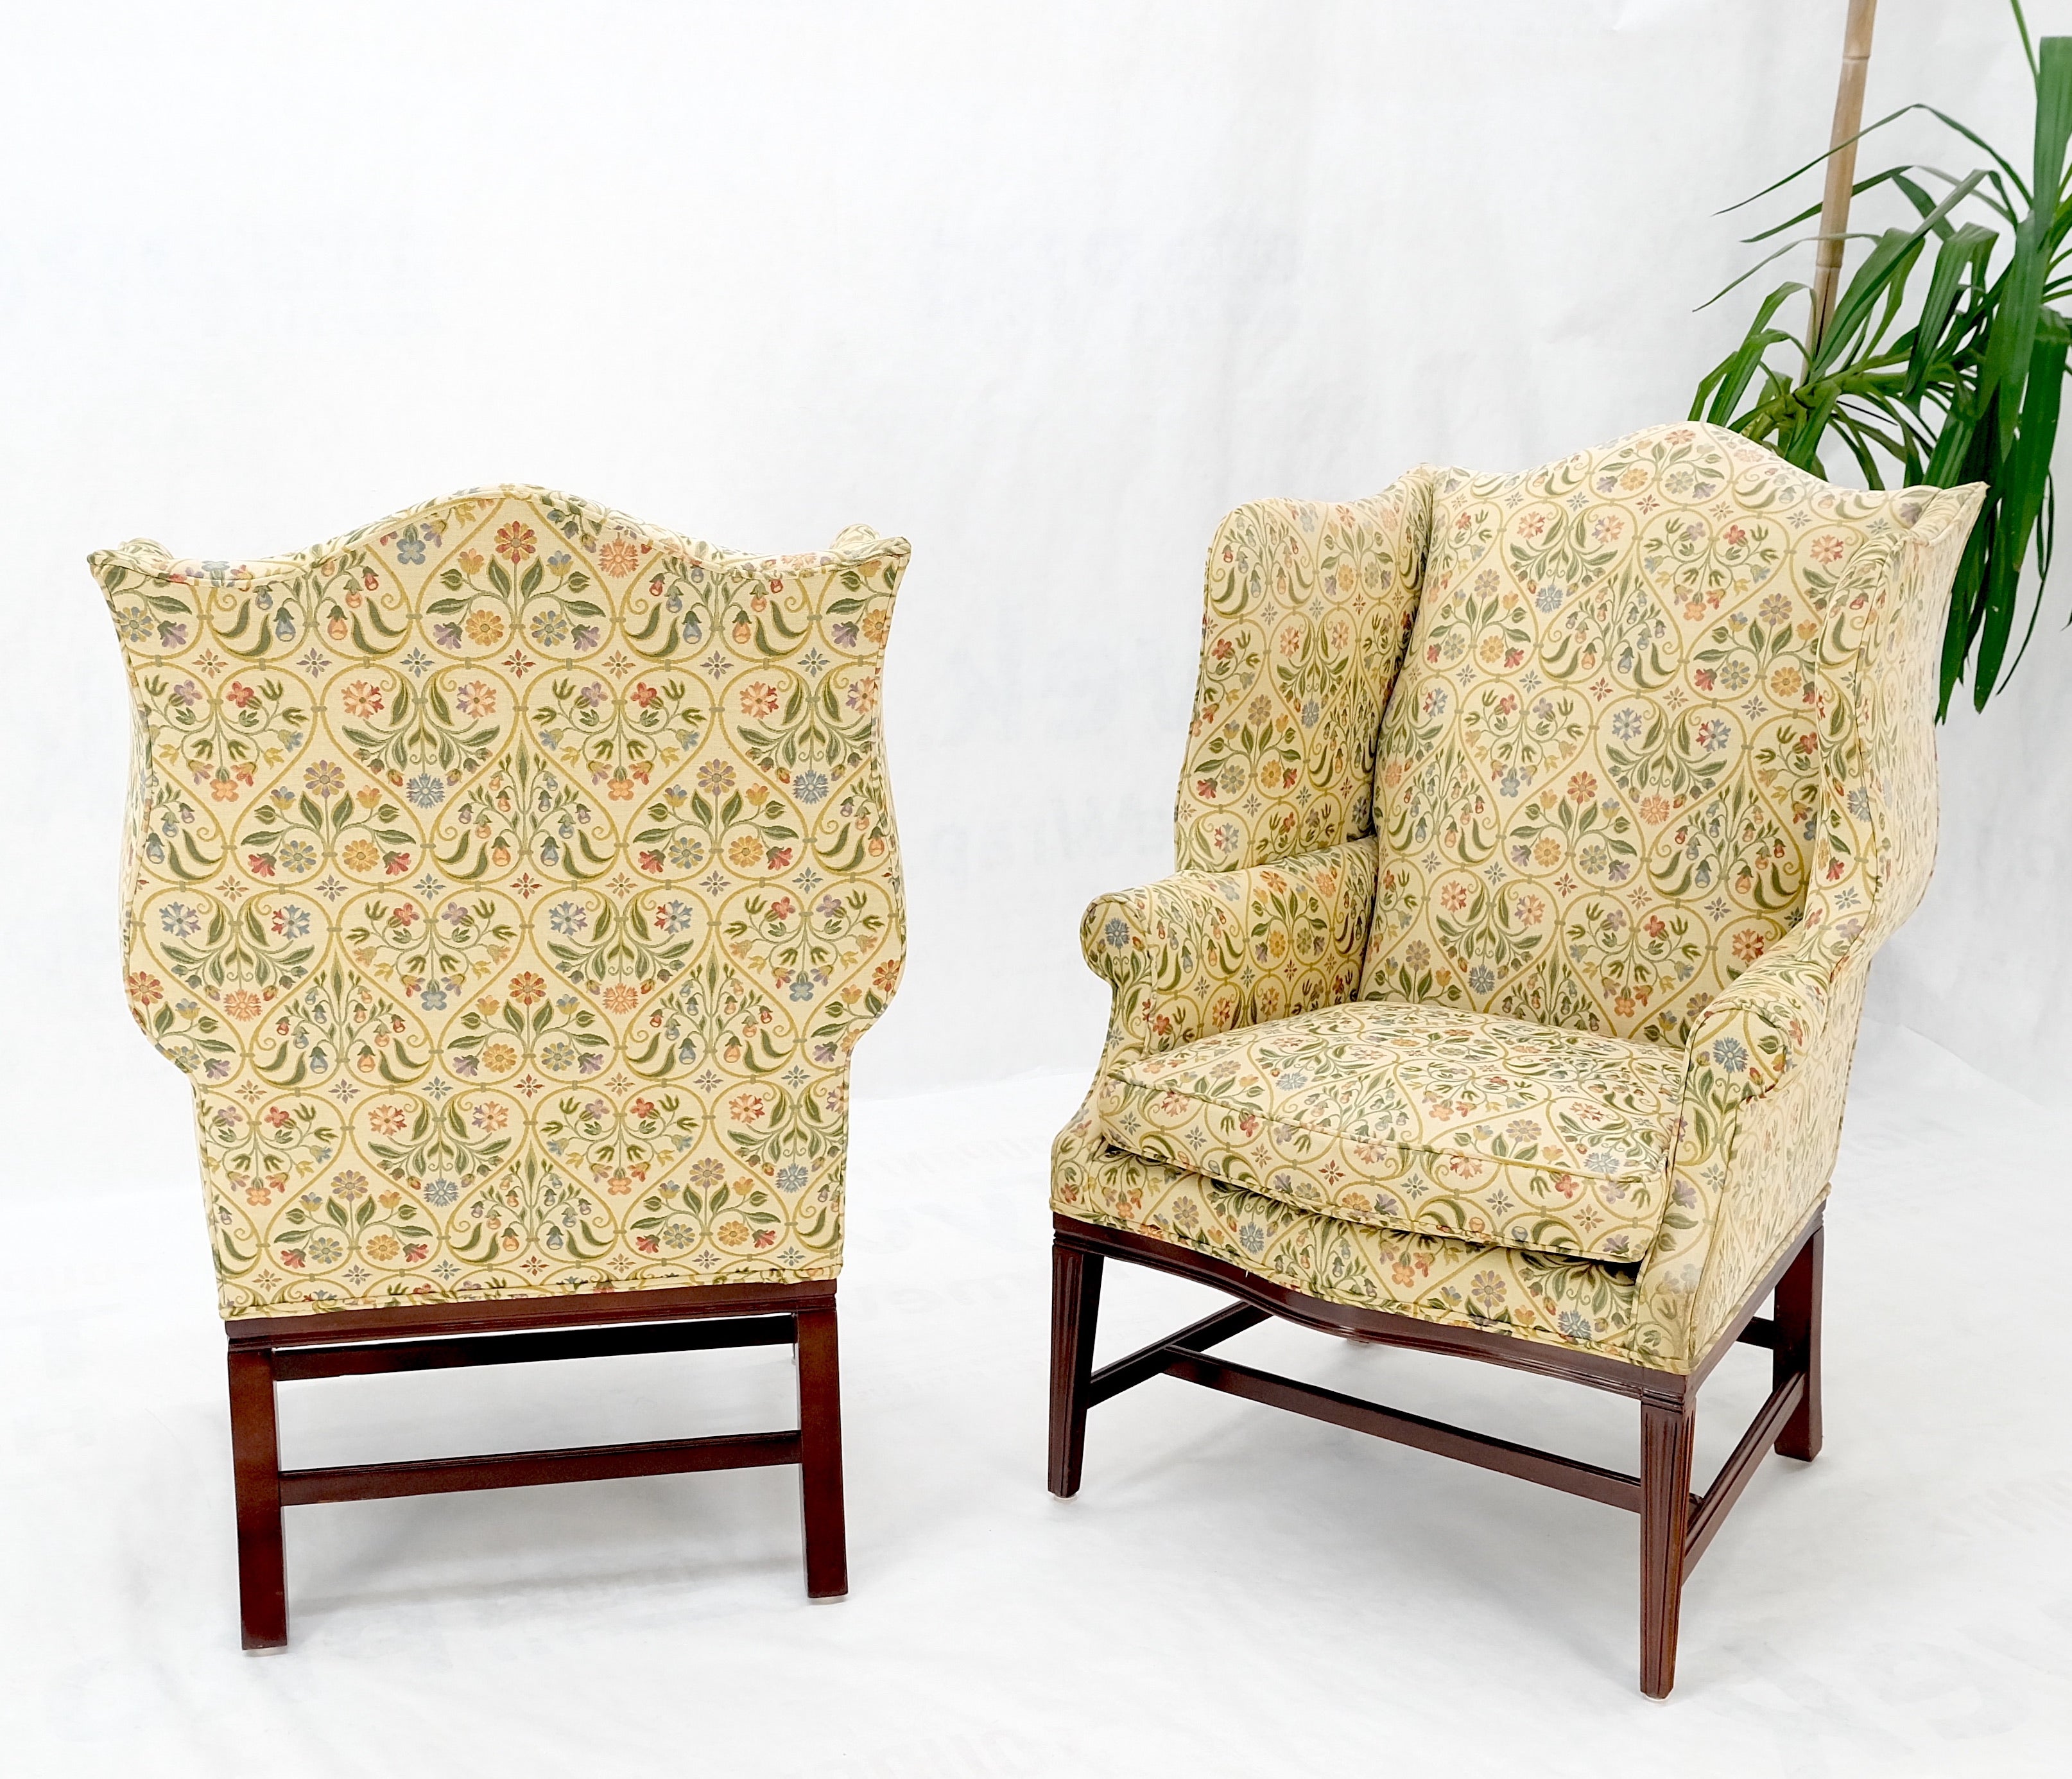 Pair of Deep Profile Antique Wing arm chairs mahogany legs Federal Style.